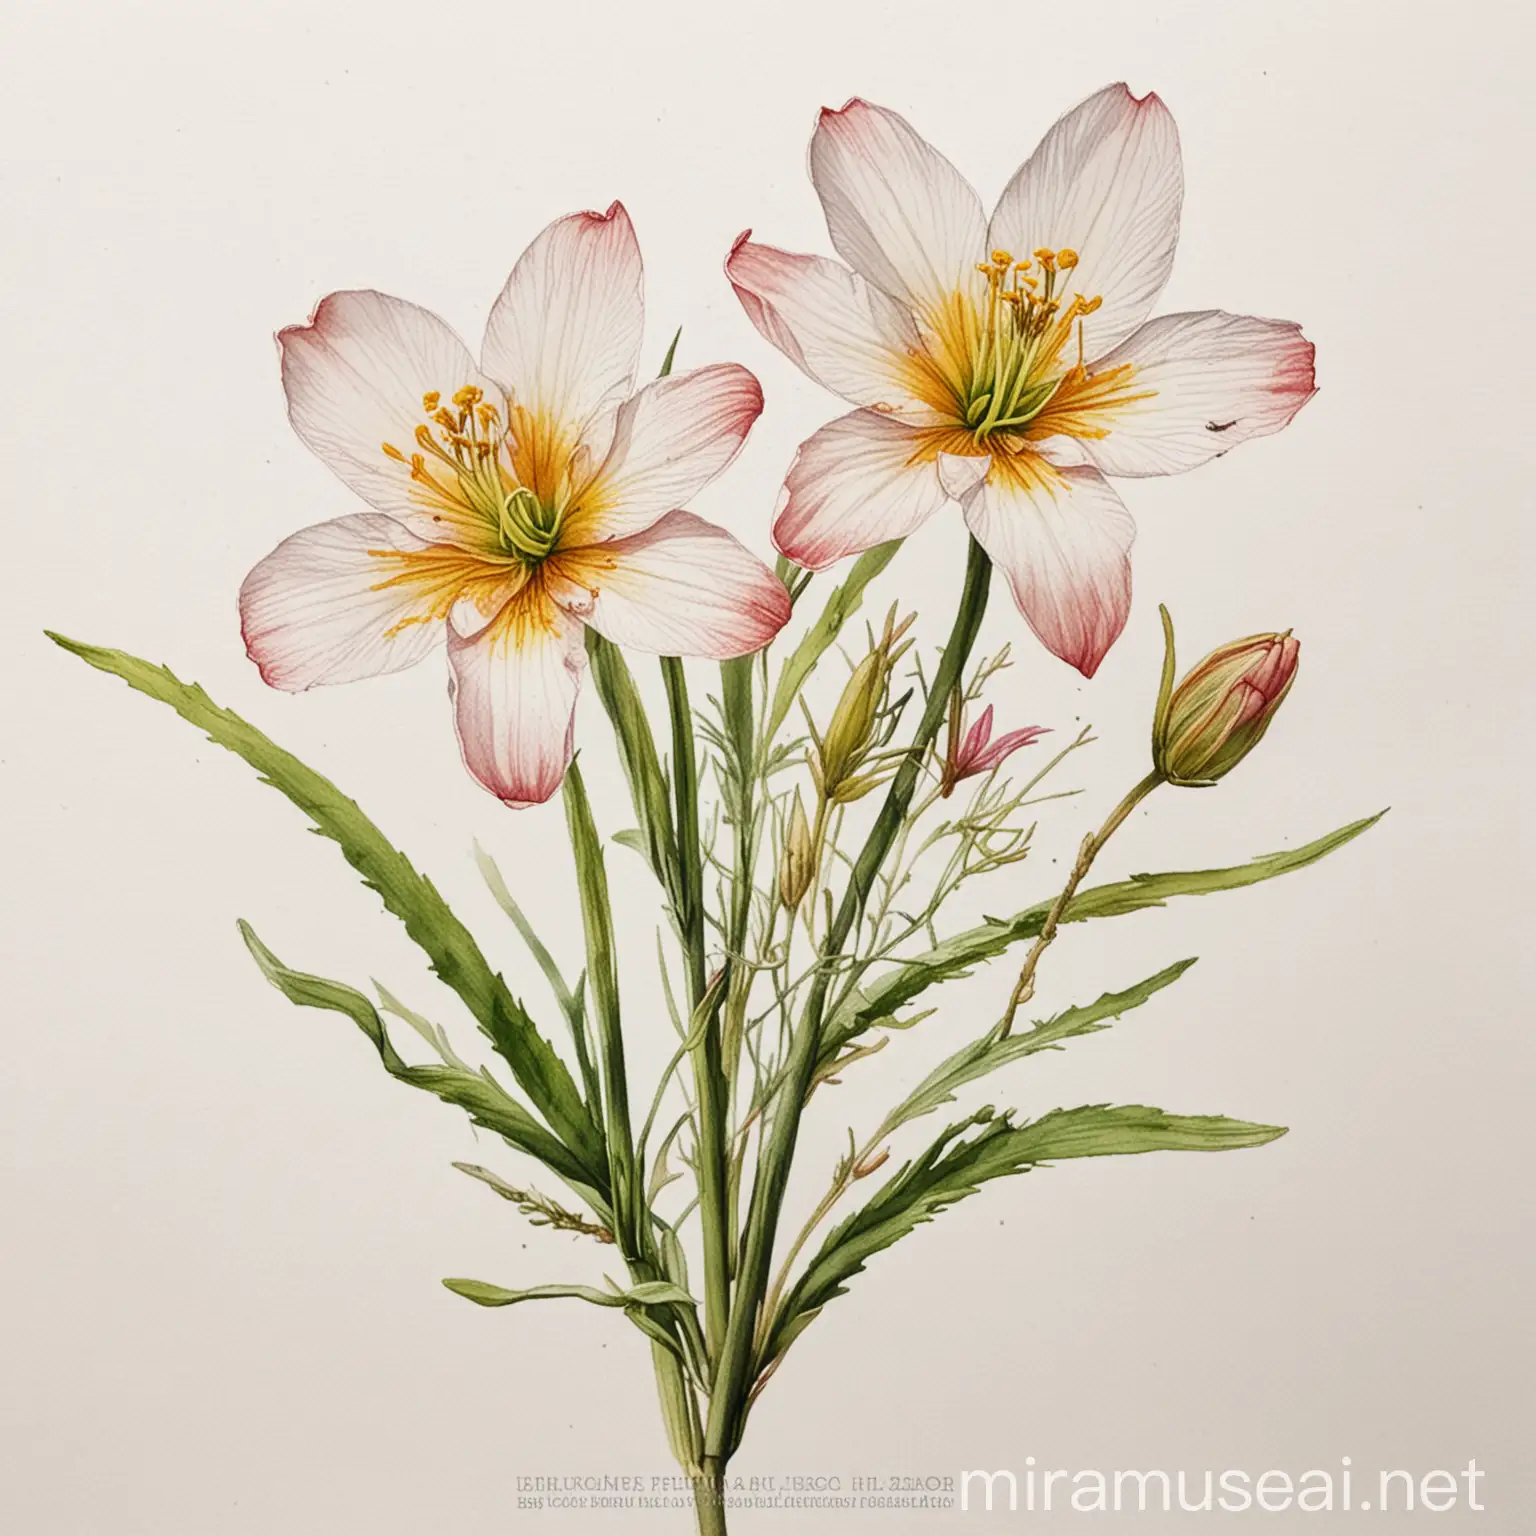 Zephyranthes fosteri Watercolor Illustration on White Background